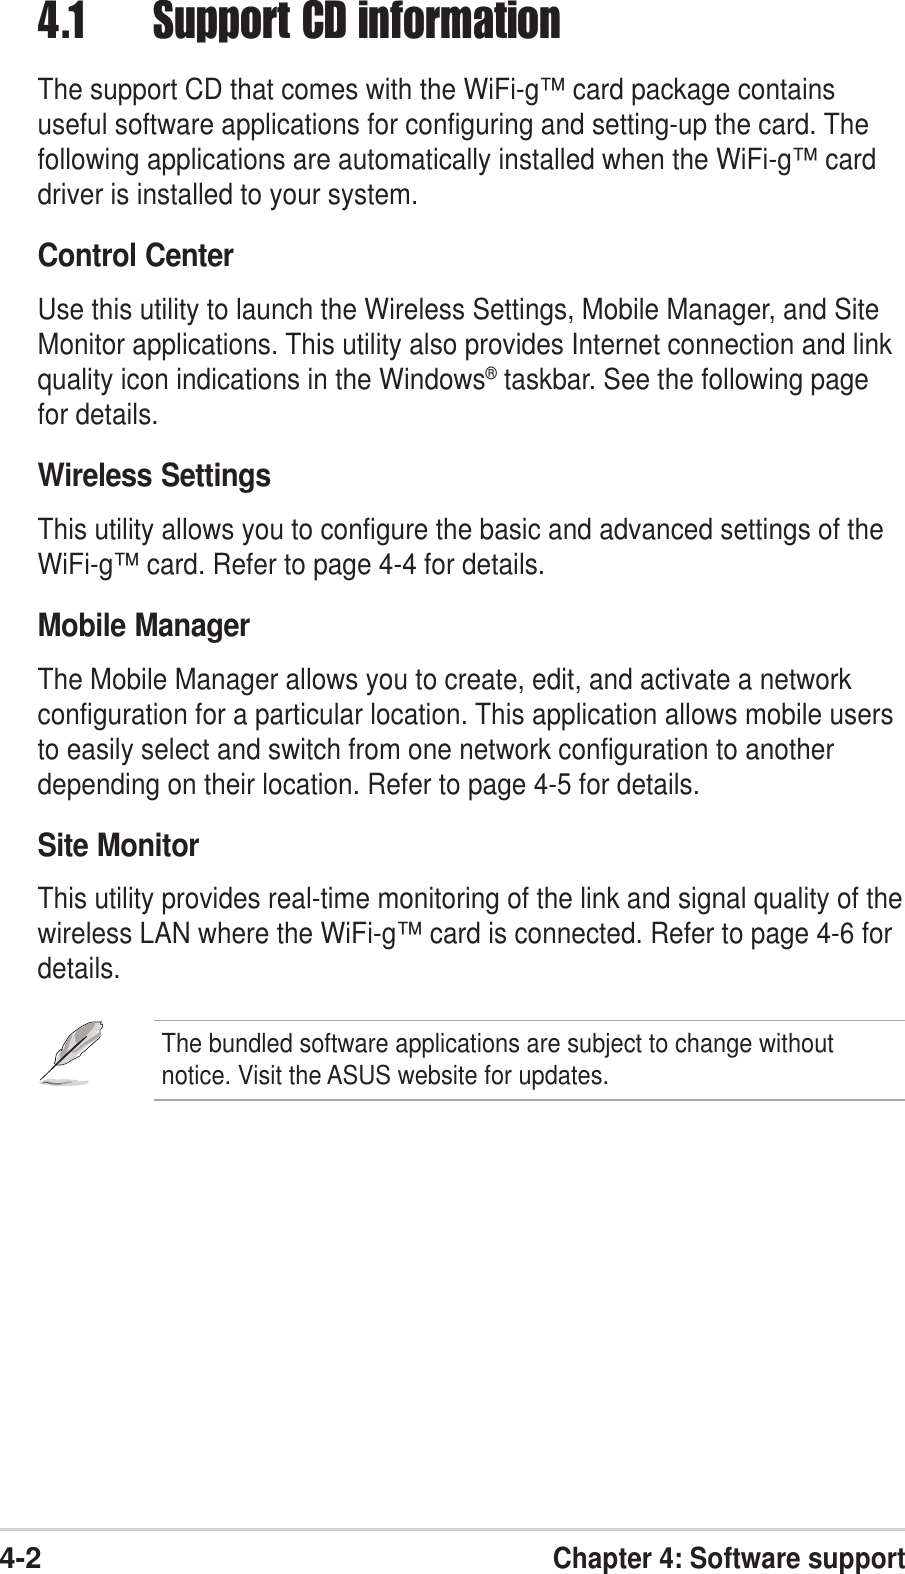 4-2Chapter 4: Software support4.1 Support CD informationThe support CD that comes with the WiFi-g™ card package containsuseful software applications for configuring and setting-up the card. Thefollowing applications are automatically installed when the WiFi-g™ carddriver is installed to your system.Control CenterUse this utility to launch the Wireless Settings, Mobile Manager, and SiteMonitor applications. This utility also provides Internet connection and linkquality icon indications in the Windows® taskbar. See the following pagefor details.Wireless SettingsThis utility allows you to configure the basic and advanced settings of theWiFi-g™ card. Refer to page 4-4 for details.Mobile ManagerThe Mobile Manager allows you to create, edit, and activate a networkconfiguration for a particular location. This application allows mobile usersto easily select and switch from one network configuration to anotherdepending on their location. Refer to page 4-5 for details.Site MonitorThis utility provides real-time monitoring of the link and signal quality of thewireless LAN where the WiFi-g™ card is connected. Refer to page 4-6 fordetails.The bundled software applications are subject to change withoutnotice. Visit the ASUS website for updates.